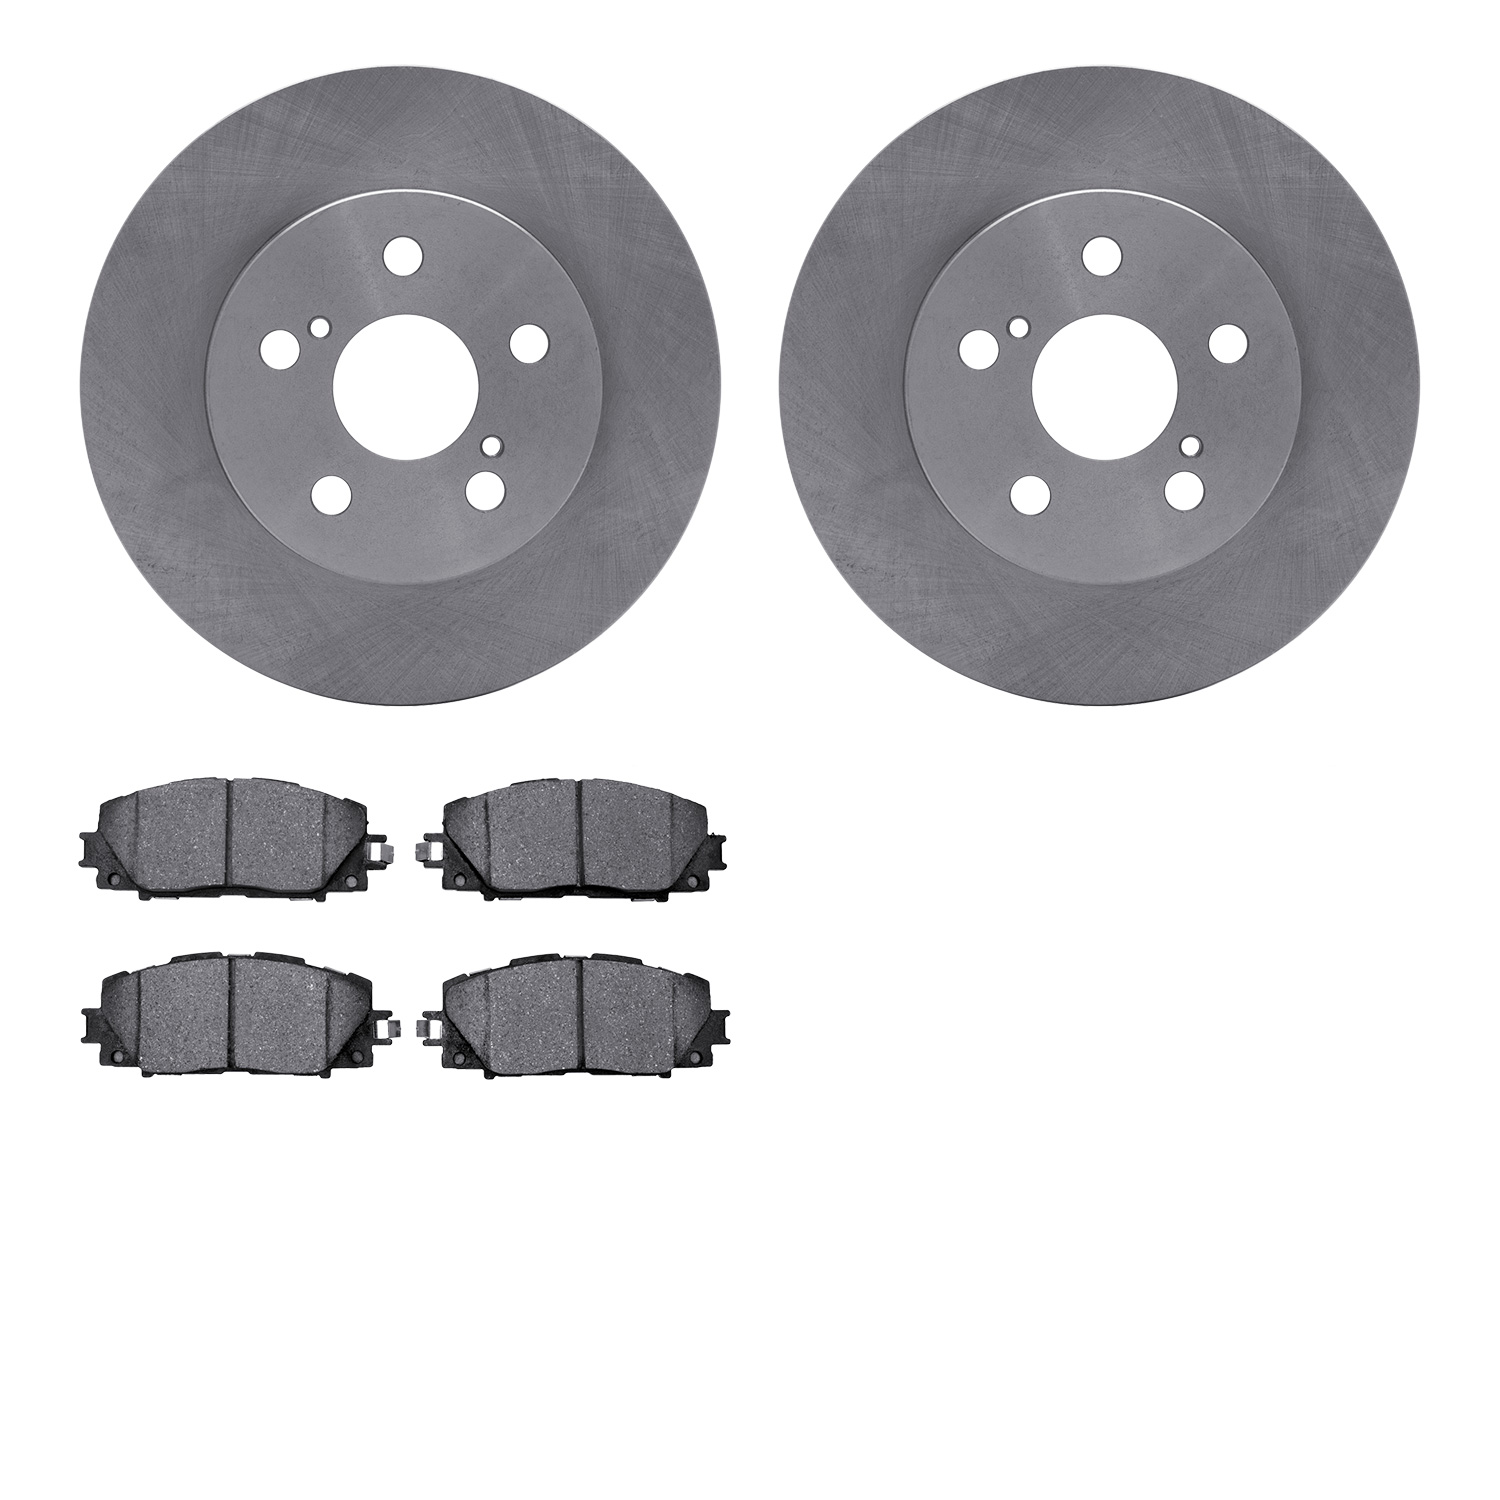 6302-76156 Brake Rotors with 3000-Series Ceramic Brake Pads Kit, Fits Select Lexus/Toyota/Scion, Position: Front